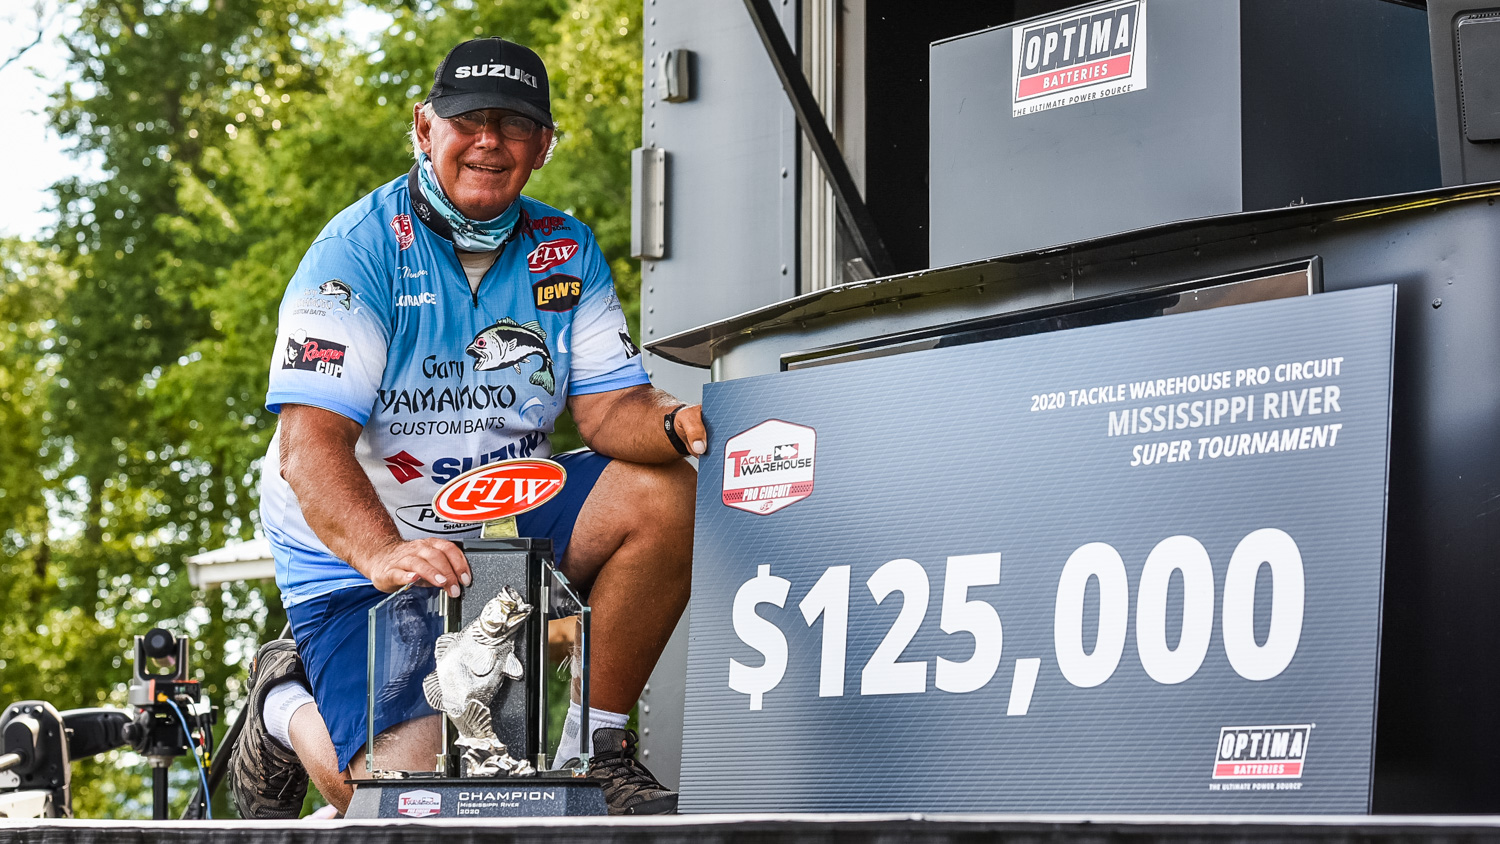 Monsoor Wins Tackle Warehouse Pro Circuit at the Mississippi River